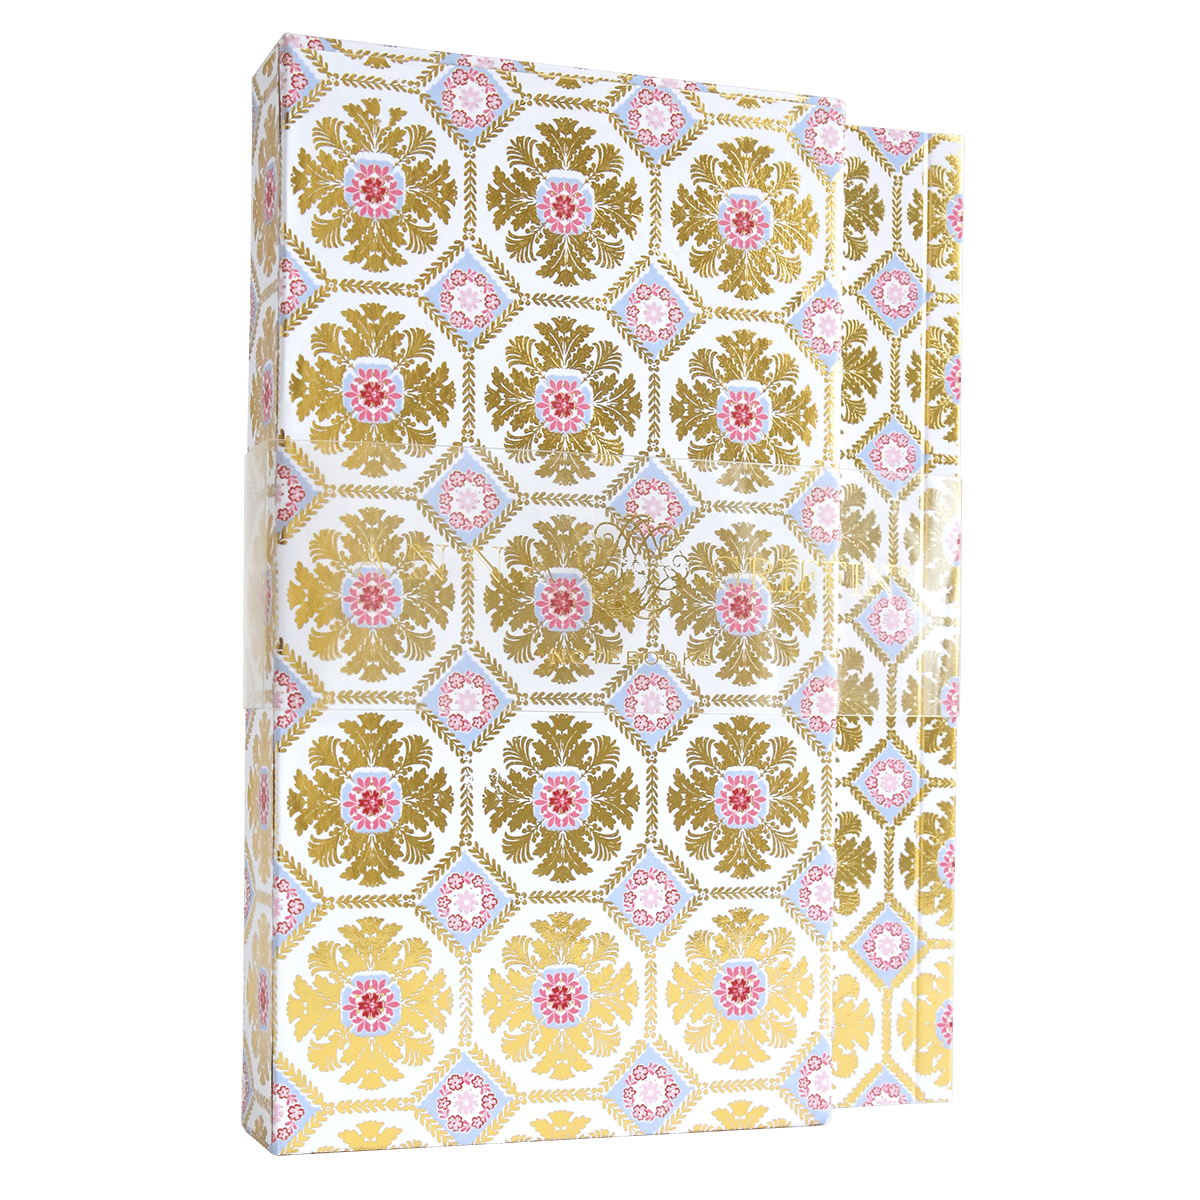 a white and gold book with a floral pattern.